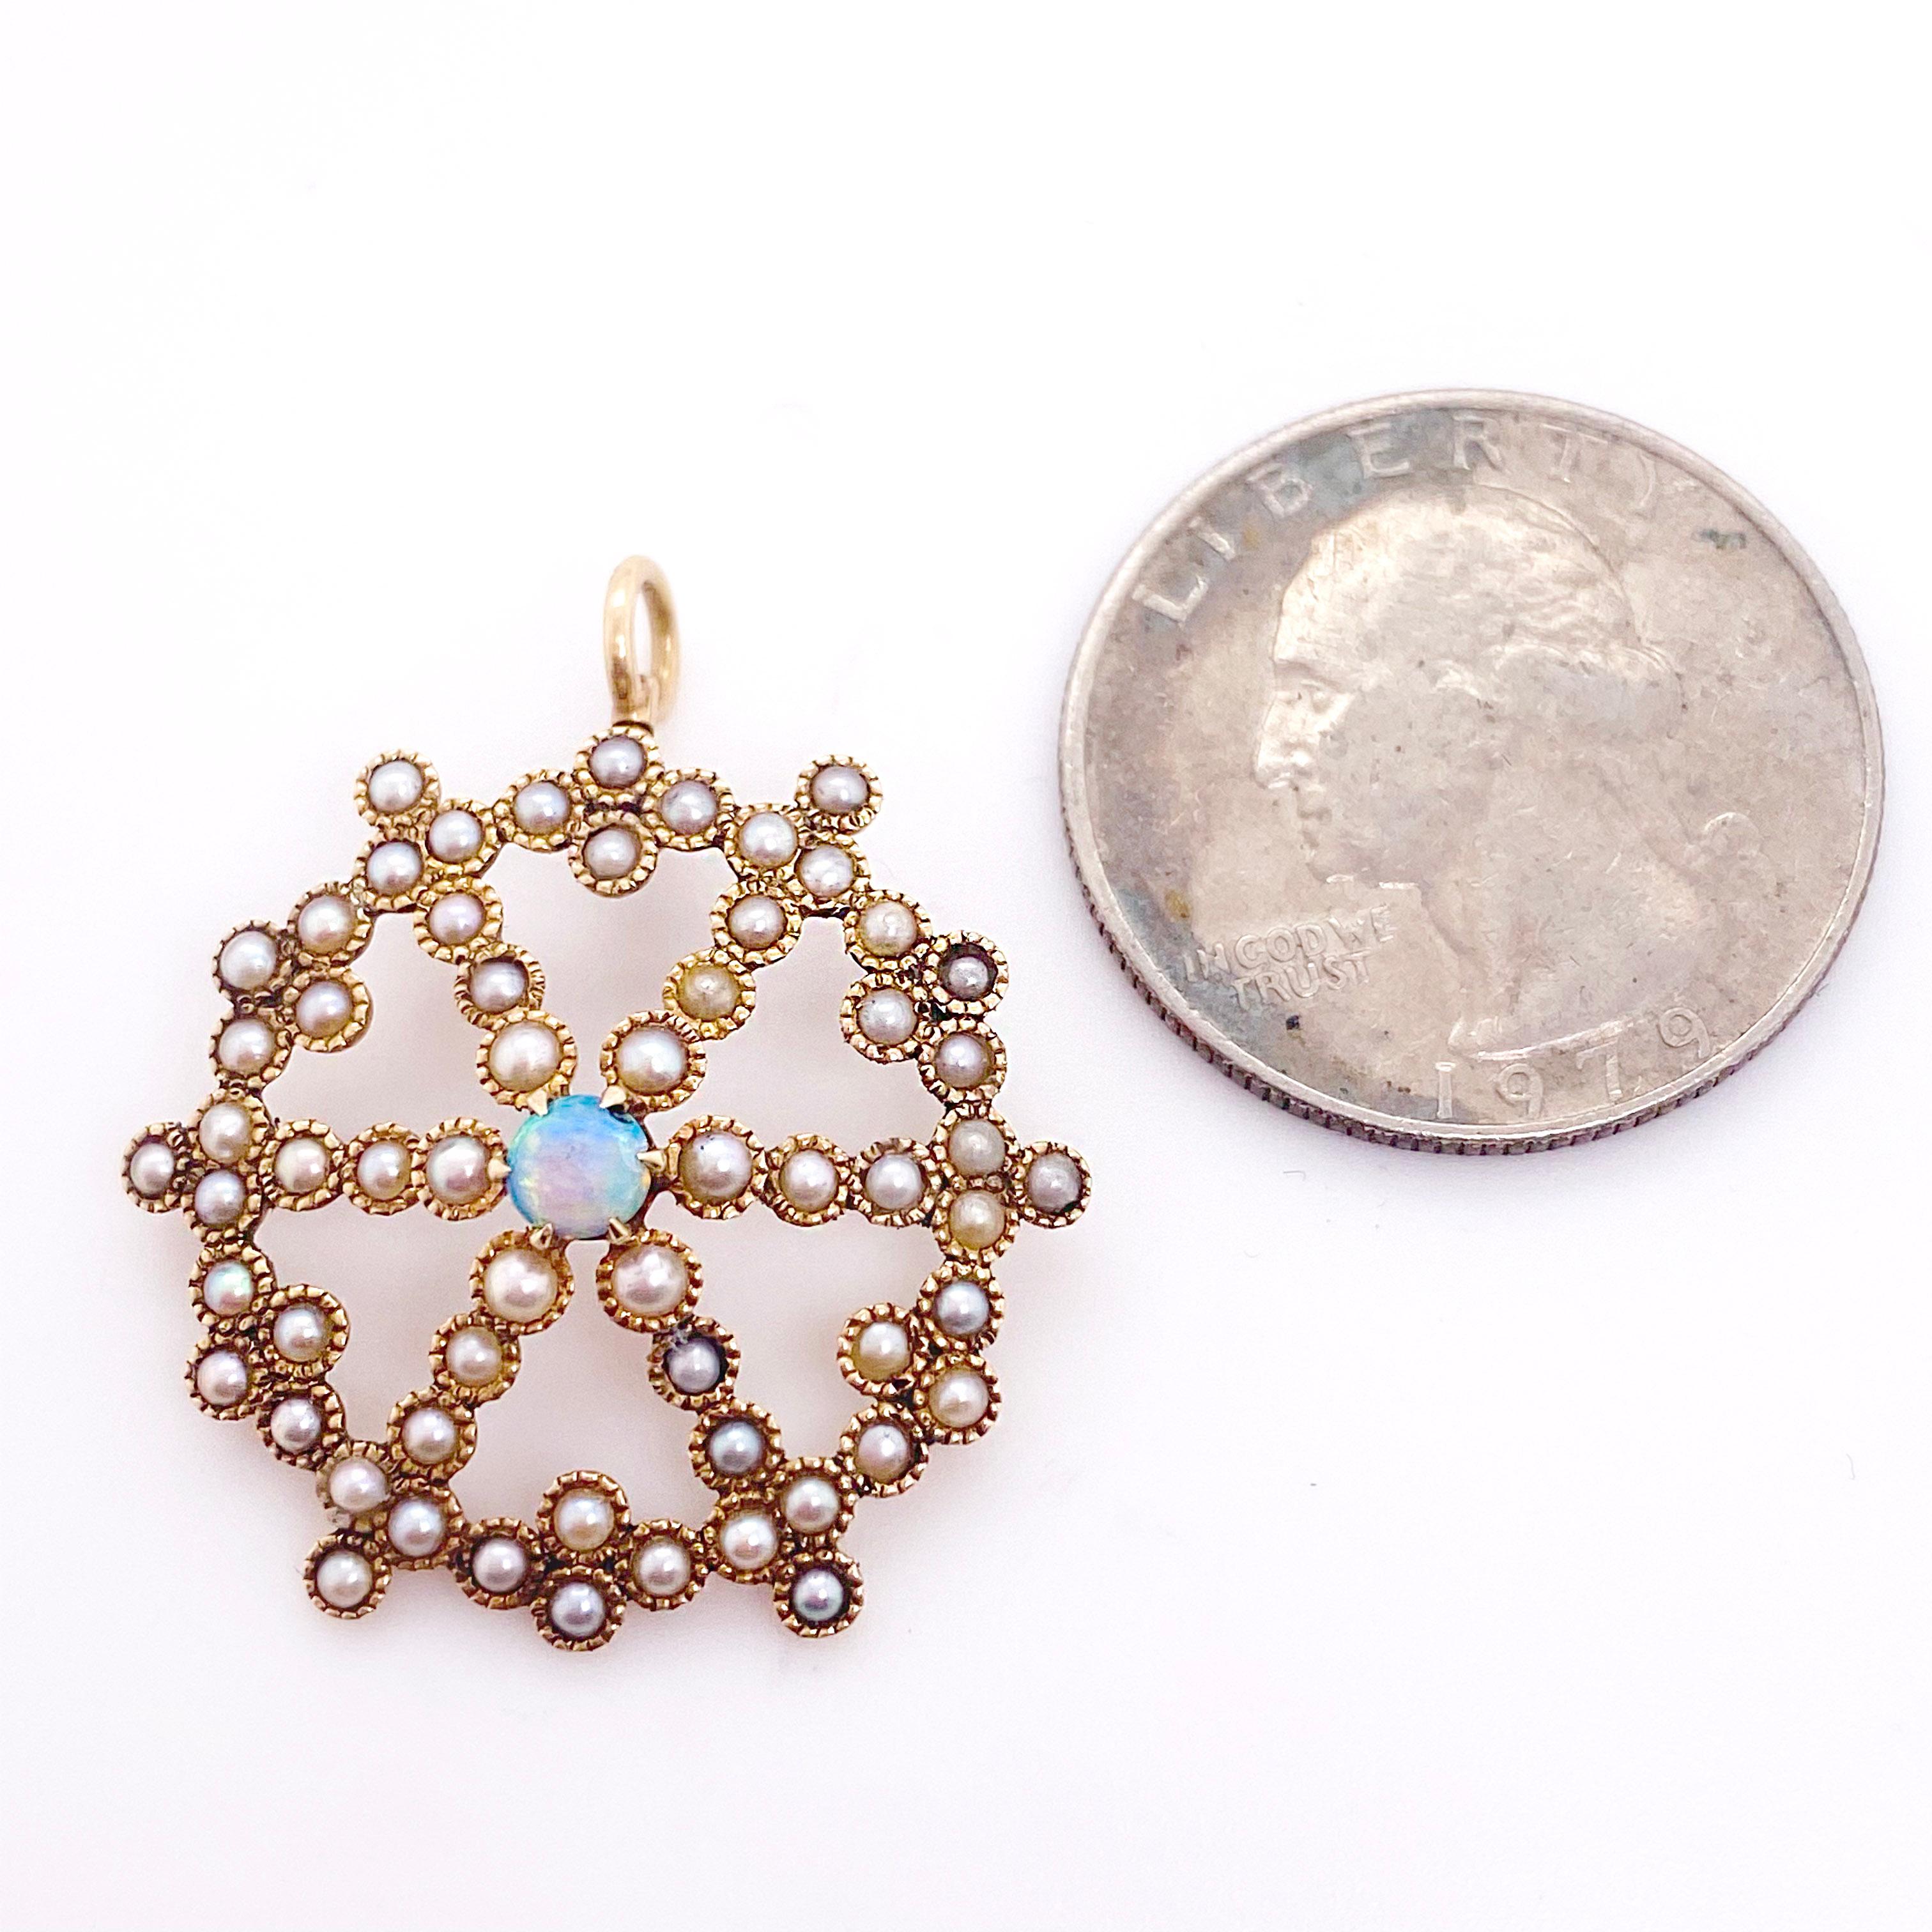 Round Cut Opal Pearl Pendant, Yellow Gold, Vintage Circa 1920 w/ Opal & 60 Pearls Pendant